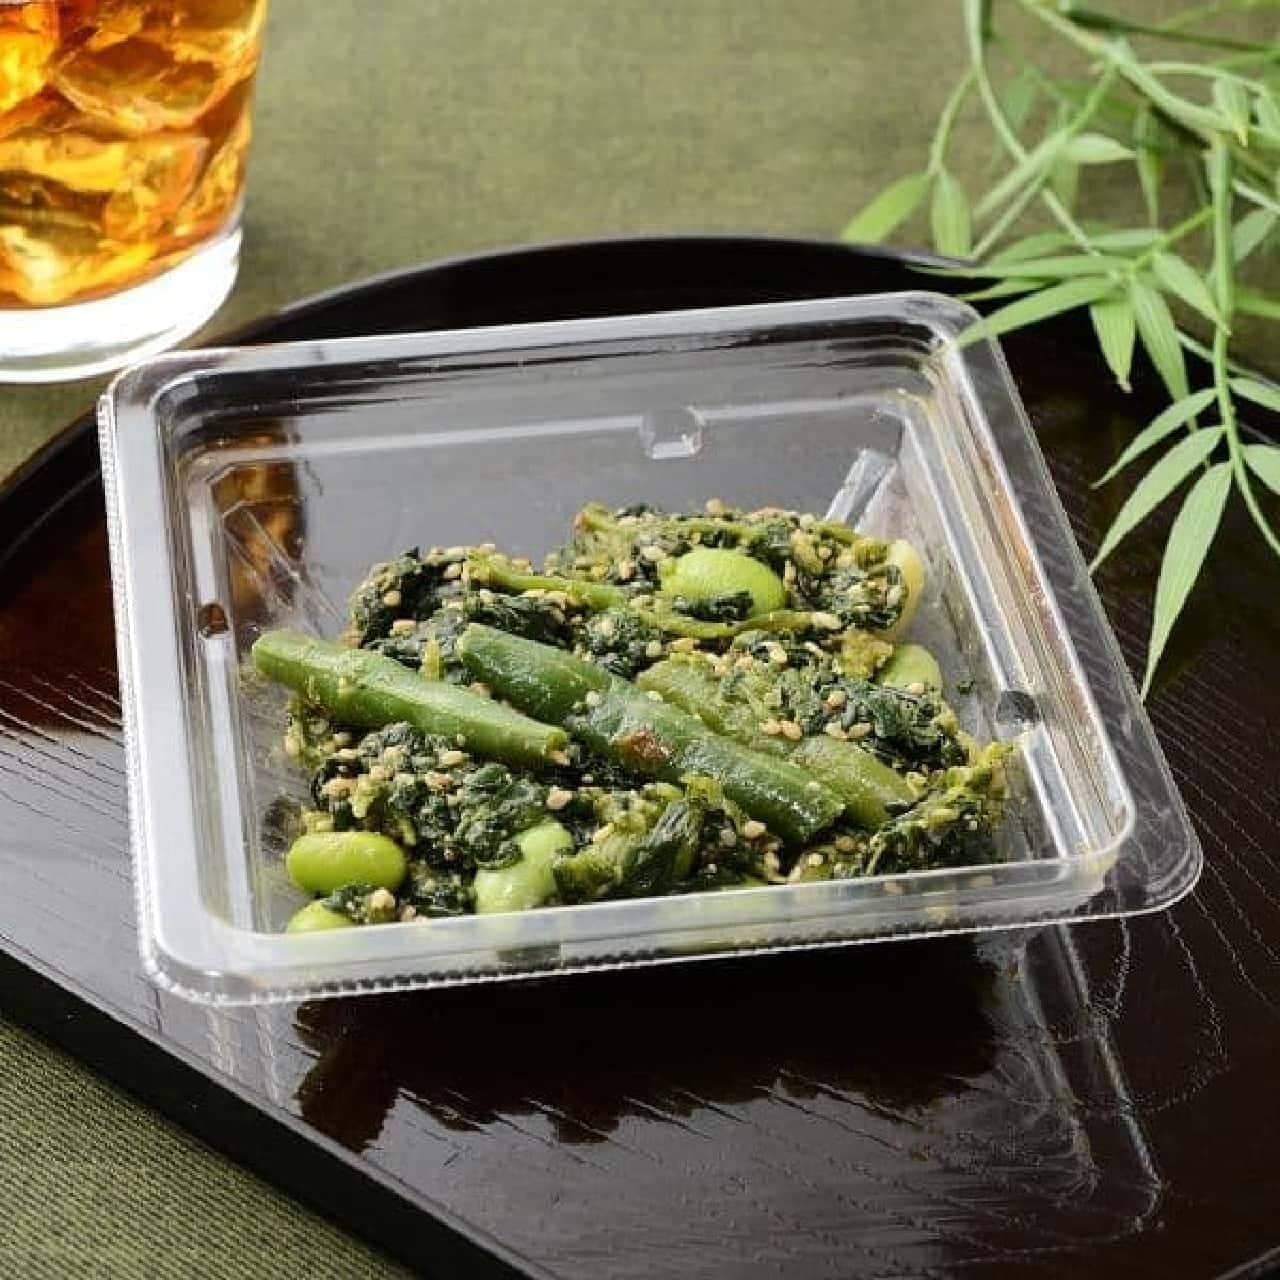 LAWSON Machi's Deli "Four Kinds of Green Vegetables with Sesame